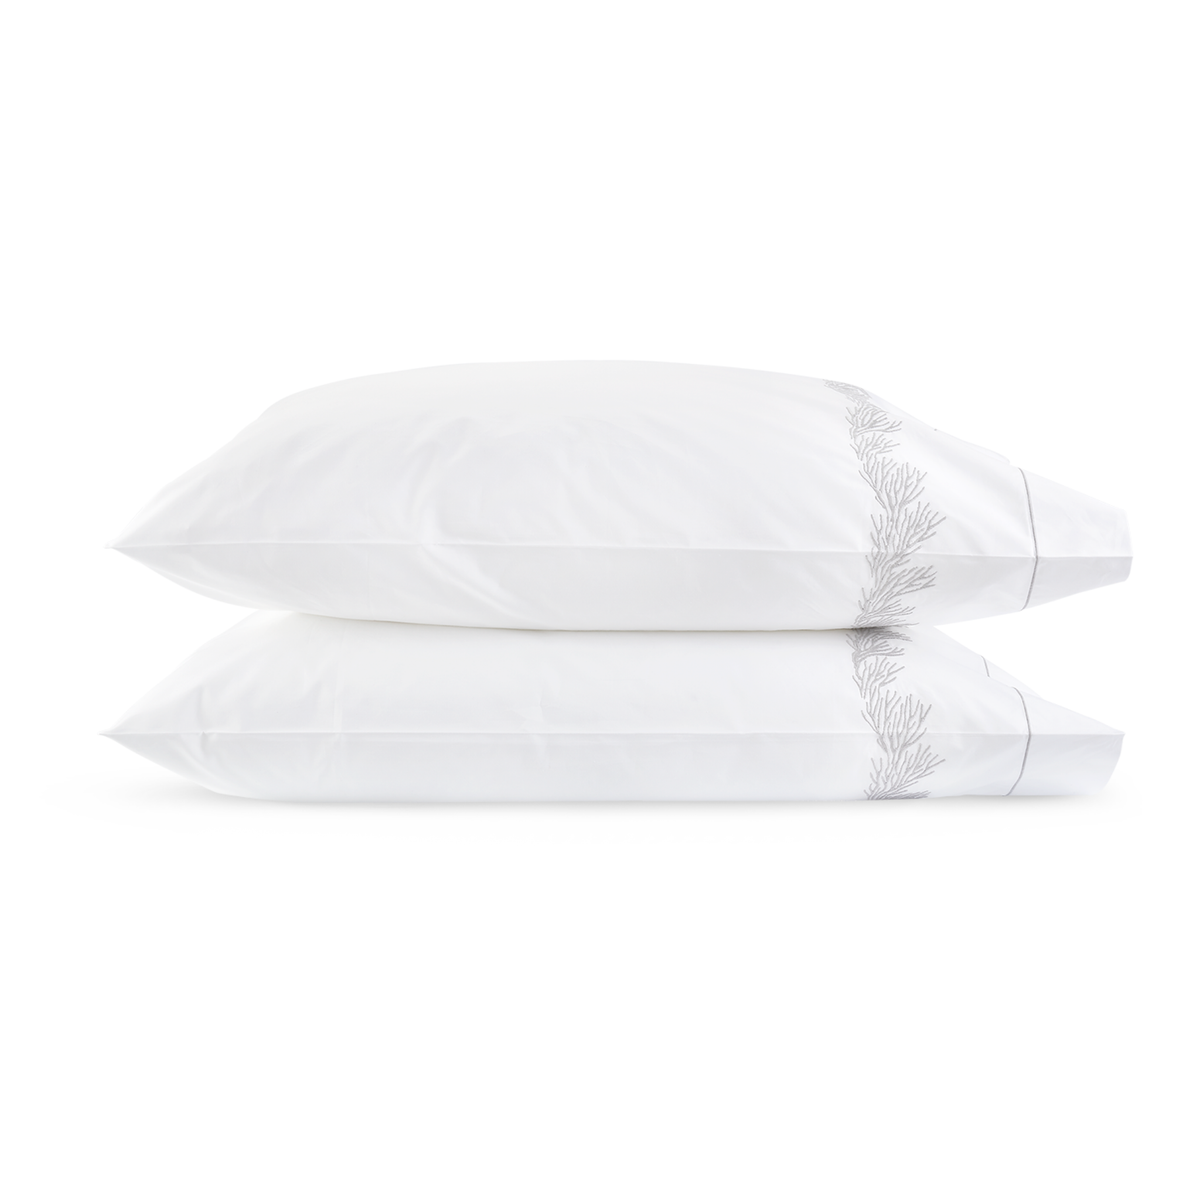 Pair of Pillowcases of Matouk Atoll Bedding Collection Alabaster Color